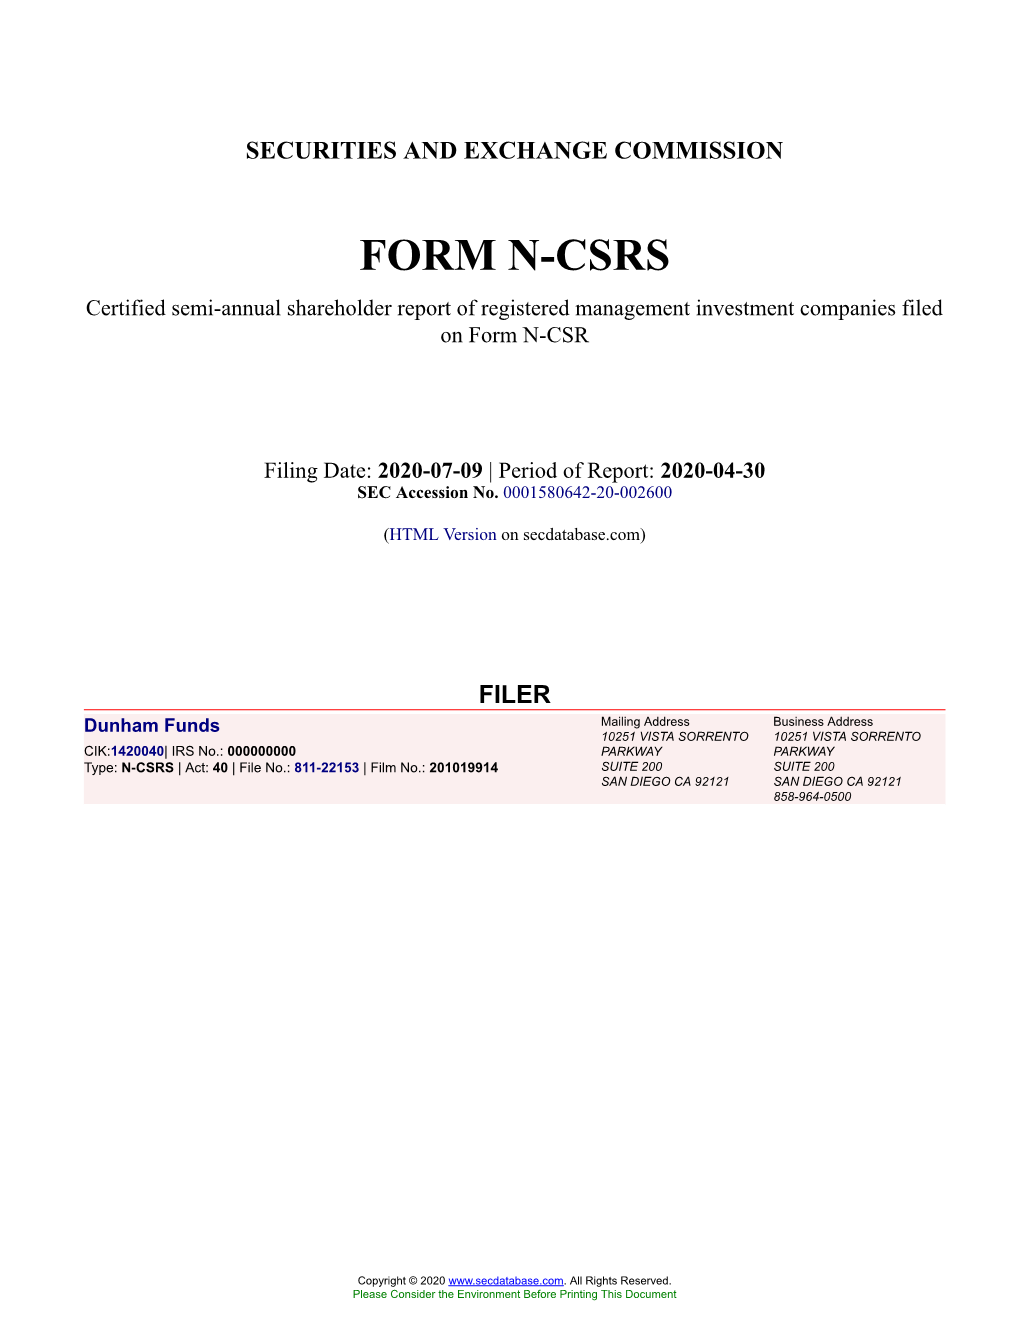 Dunham Funds Form N-CSRS Filed 2020-07-09